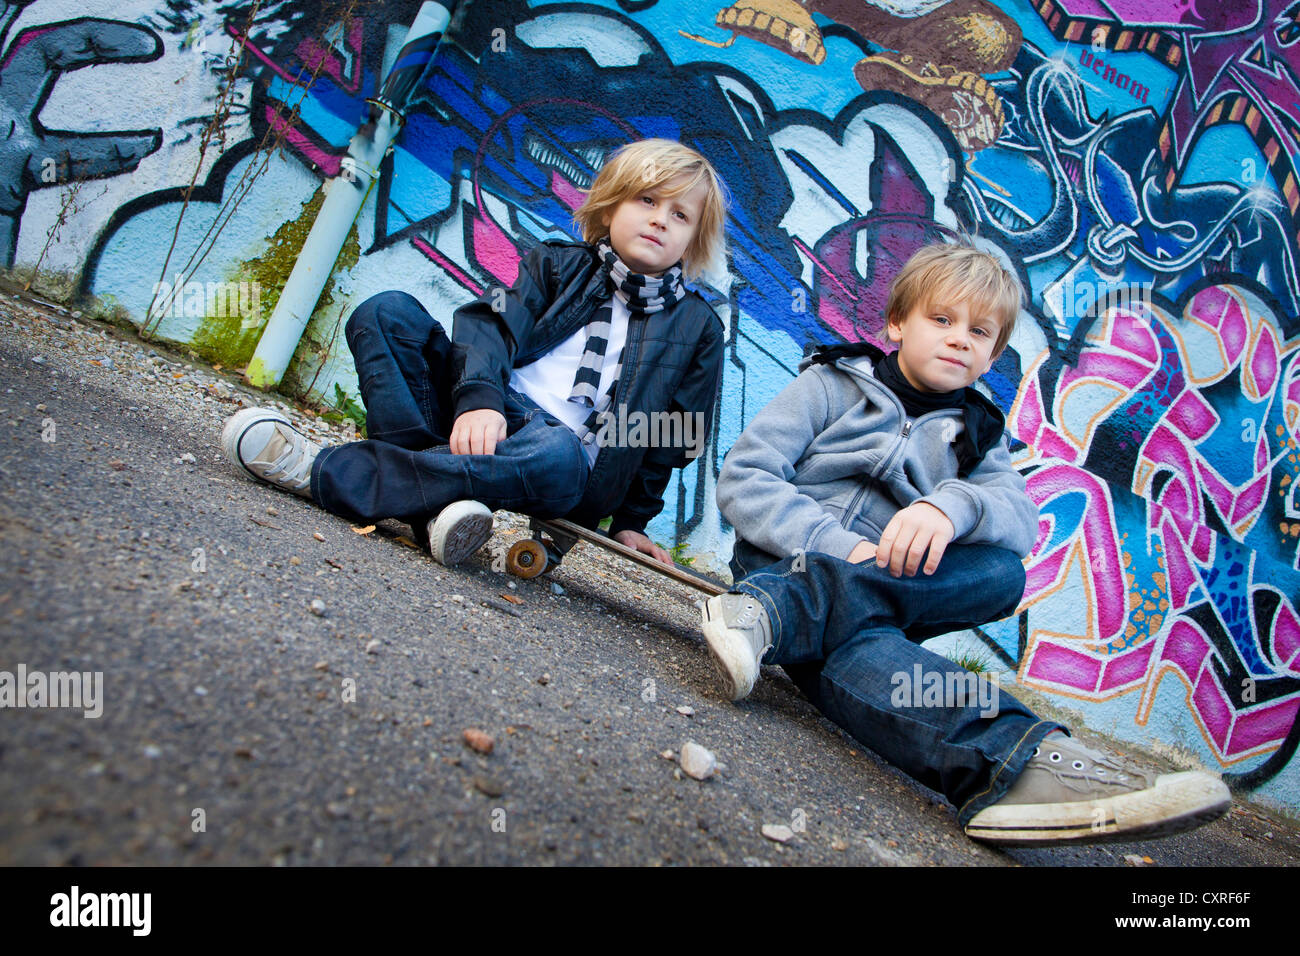 Two boys, 5 and 7 years, sitting on a skateboard in front of a wall with graffiti Stock Photo